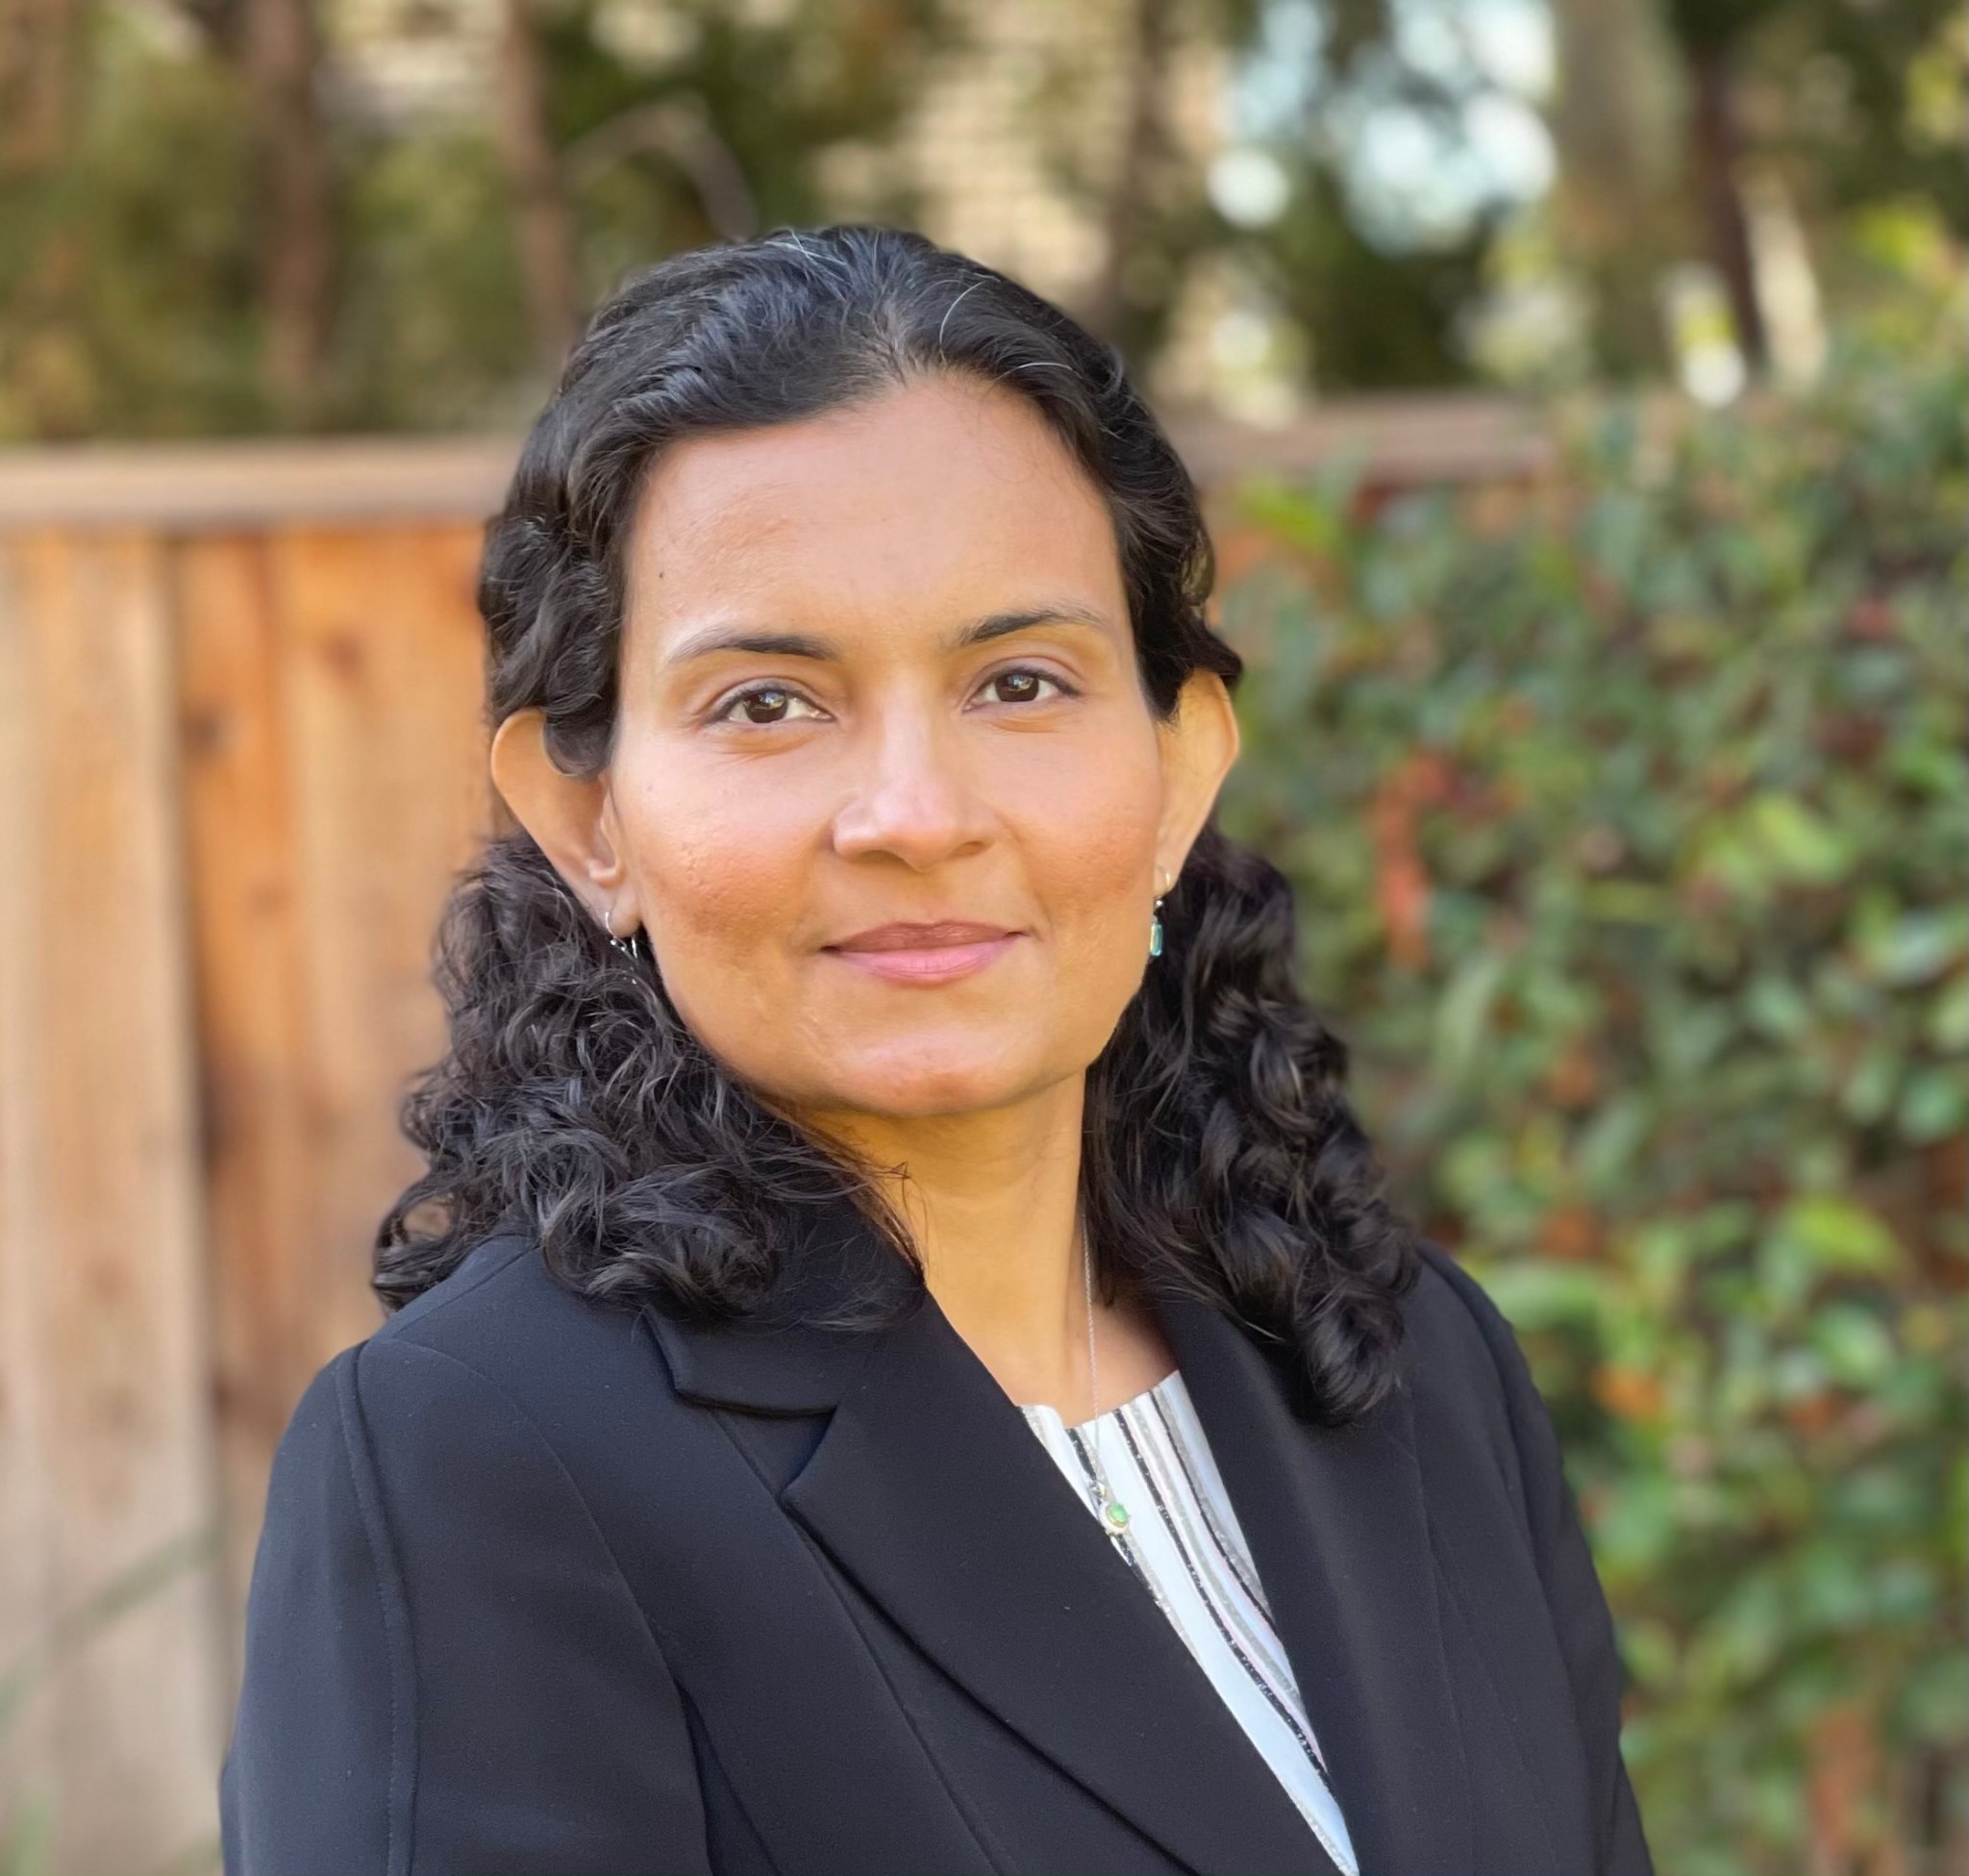 Portrait of Divya Bhadoria wearing a navy blue suit jacket. She is the second in command for NASA's Advanced Air Mobility national campaign.